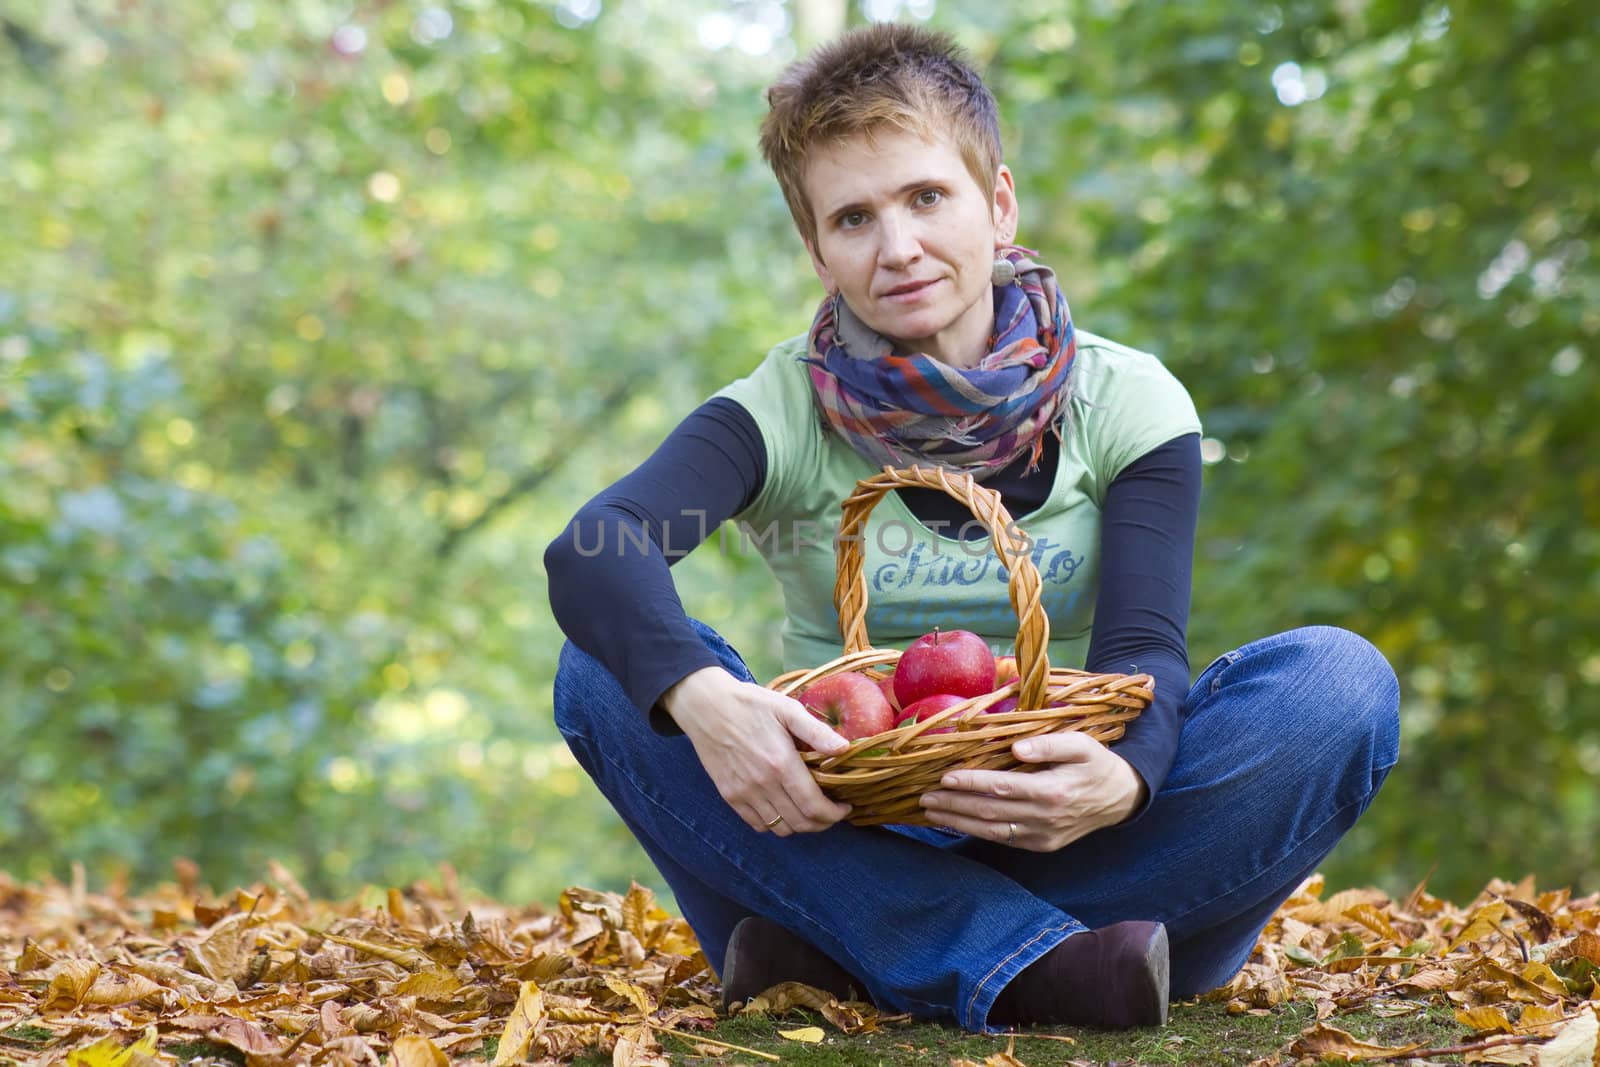 woman with a basket full of red apples  by miradrozdowski